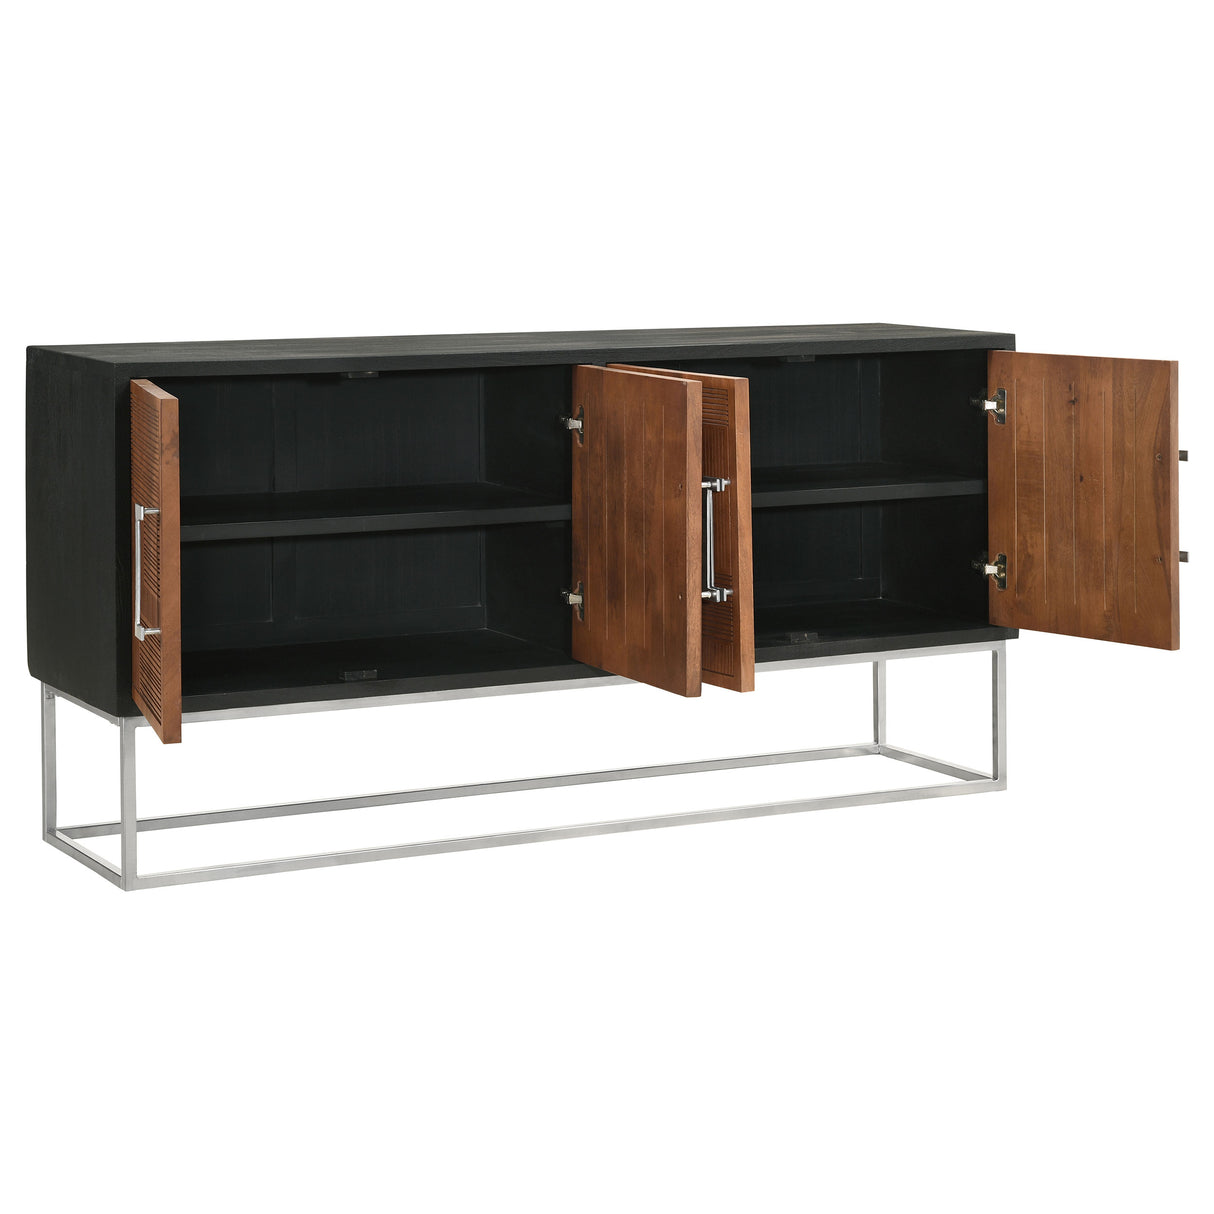 Accent Cabinet - Borman 4-door Wooden Accent Cabinet Walnut and Black